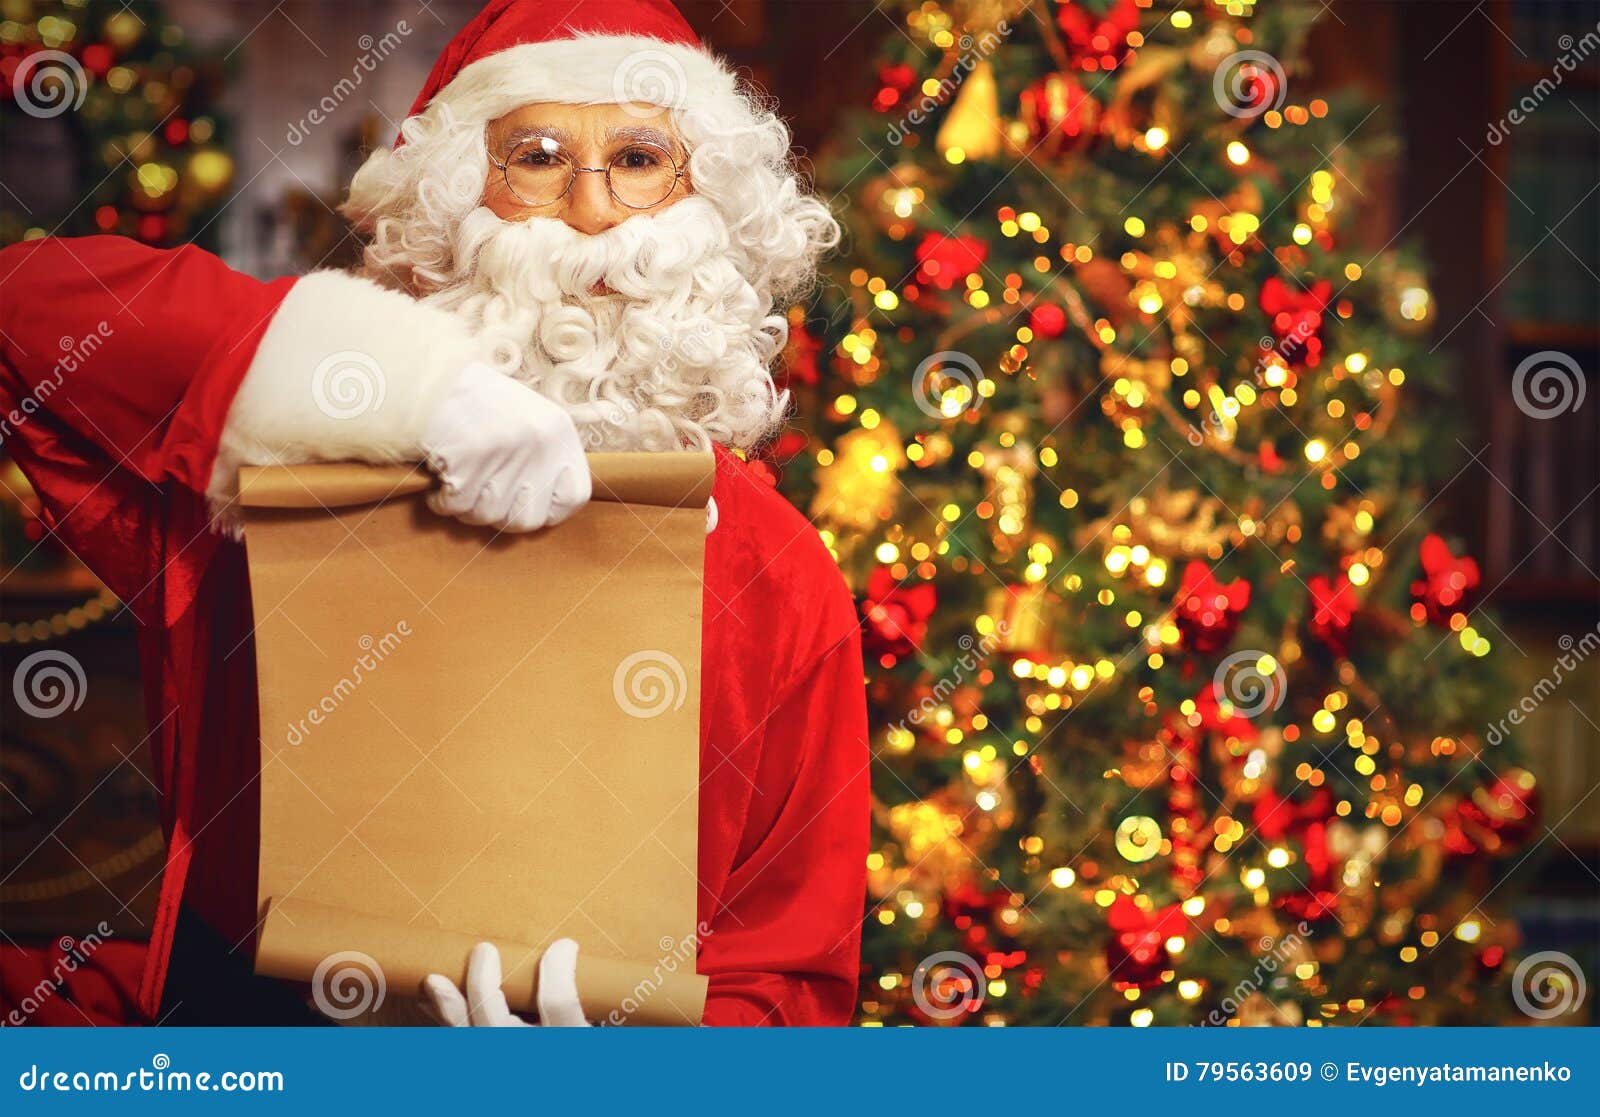 christmas-concept-santa-claus-and-blank-list-stock-image-image-of